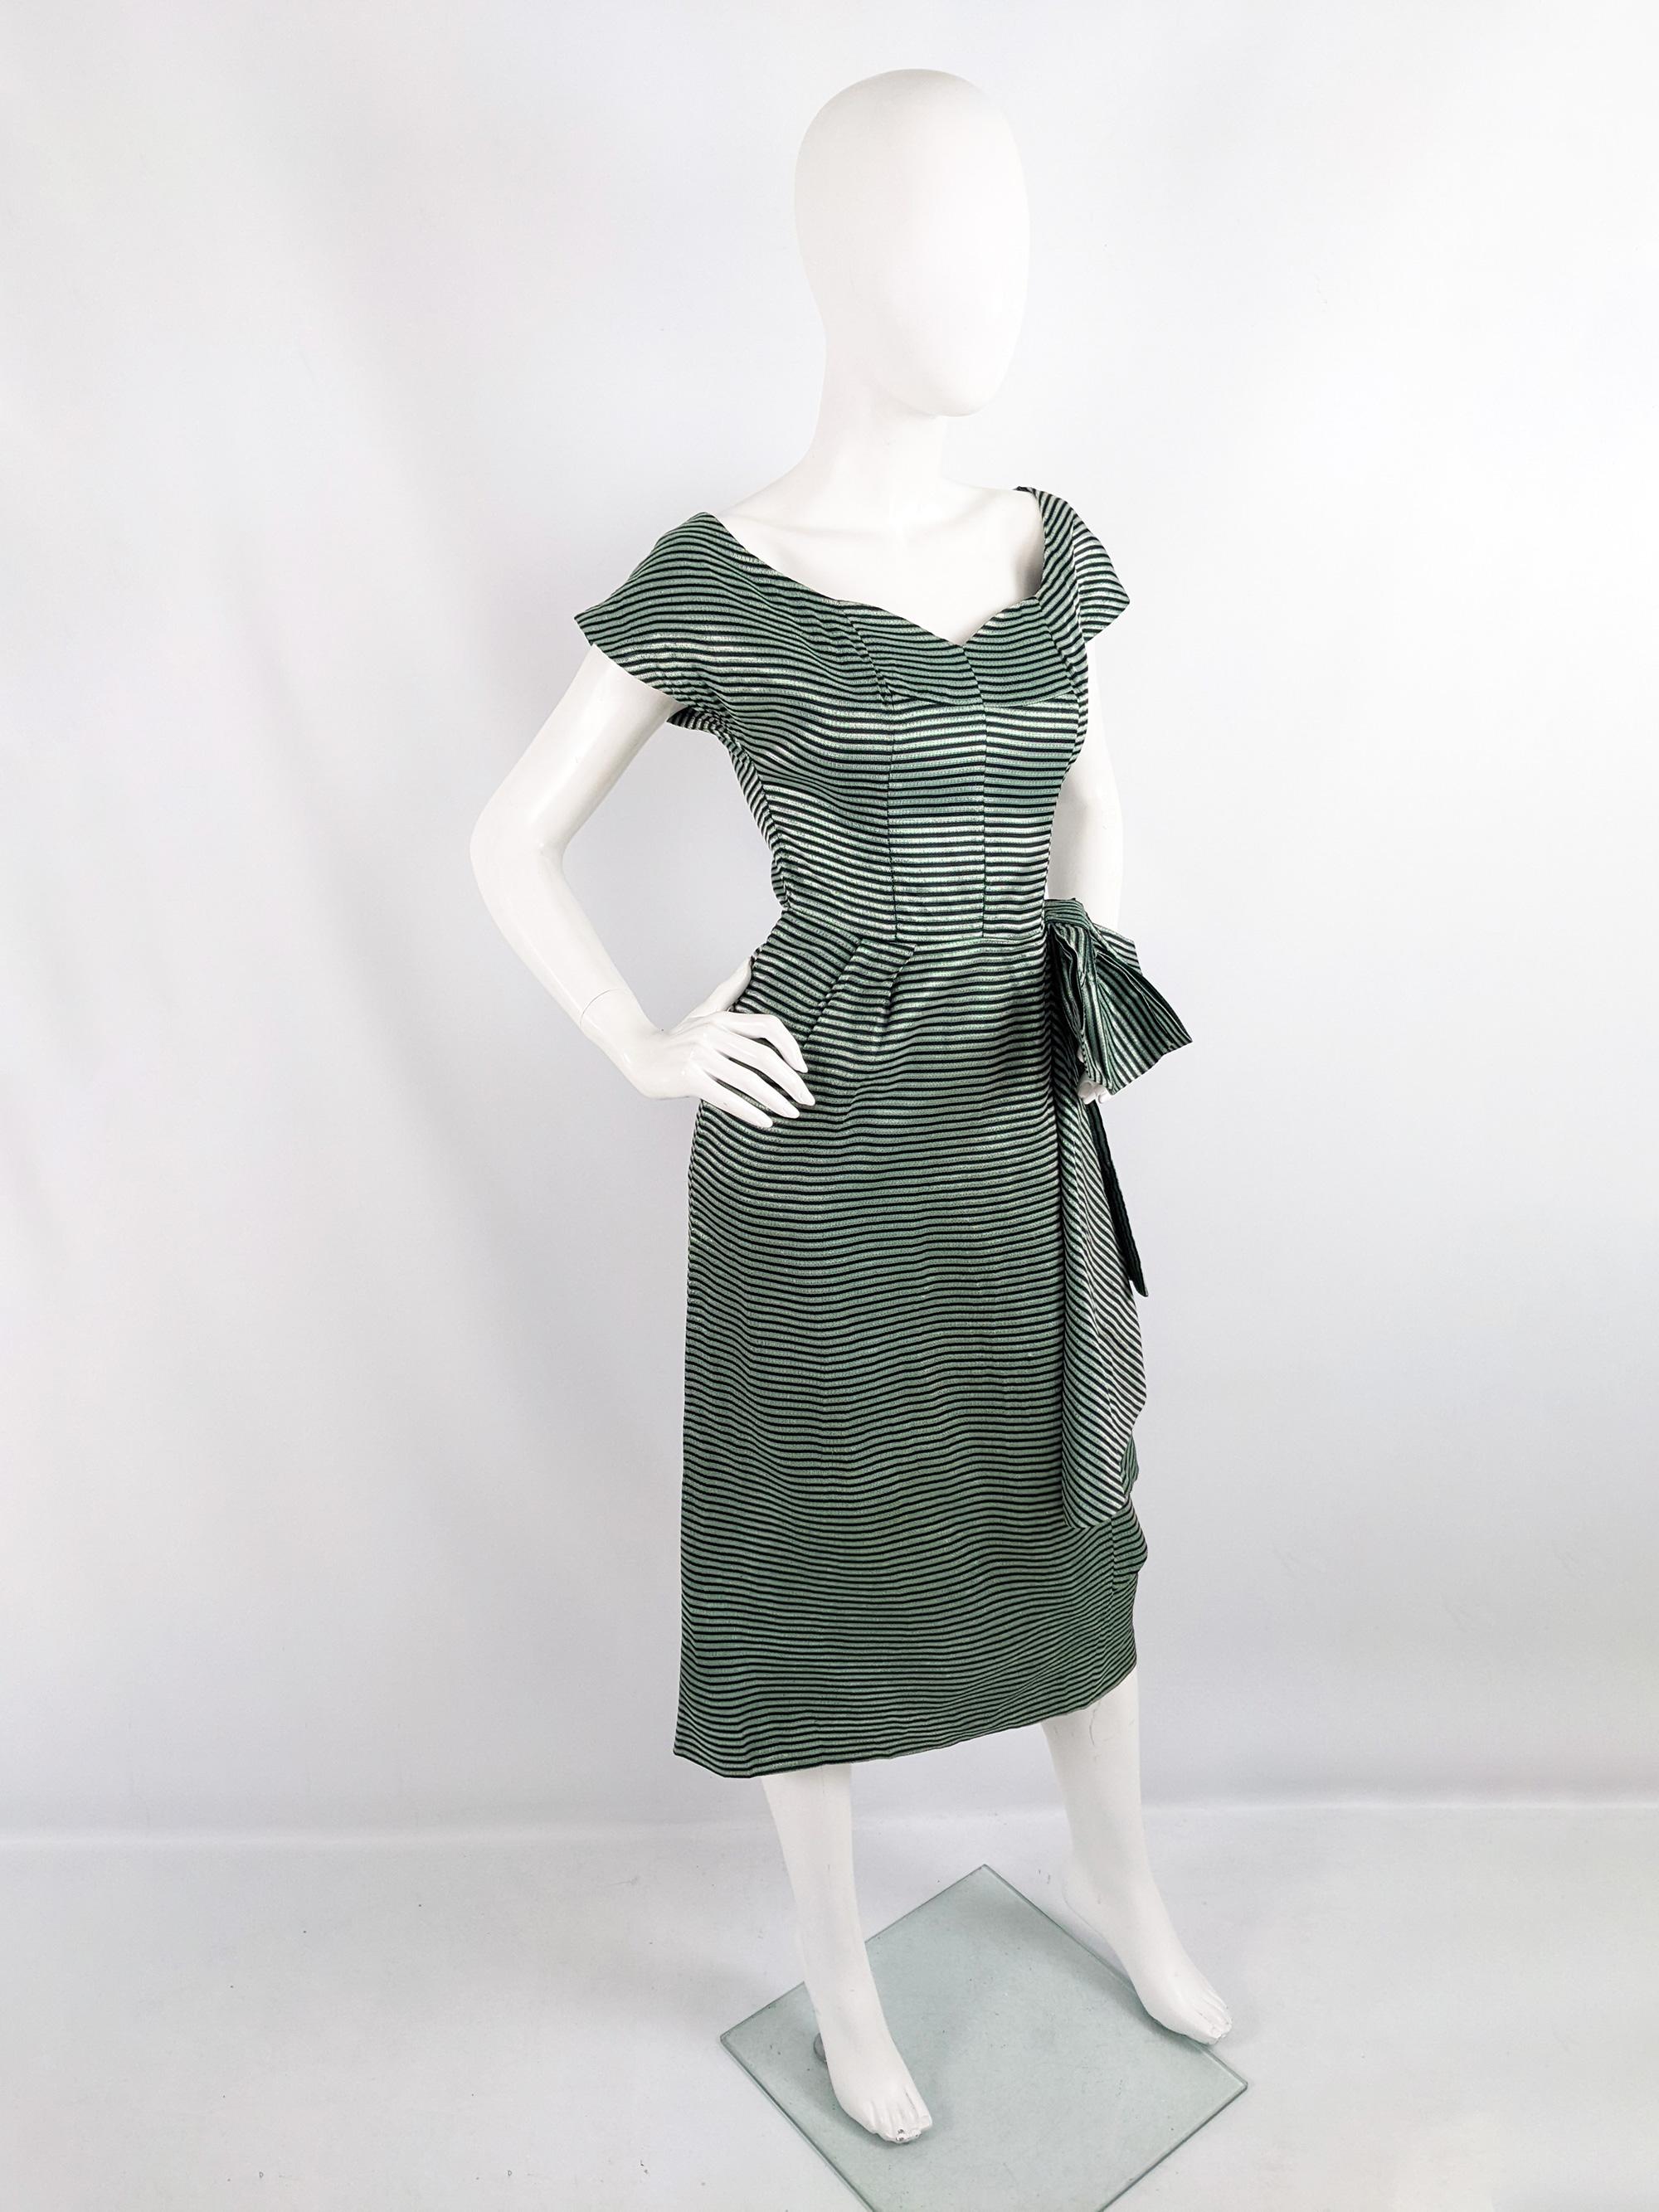 Richard Grossmark Vintage 1950s Metallic Green Lamé Bow 50s Evening Party Dress In Good Condition For Sale In Doncaster, South Yorkshire